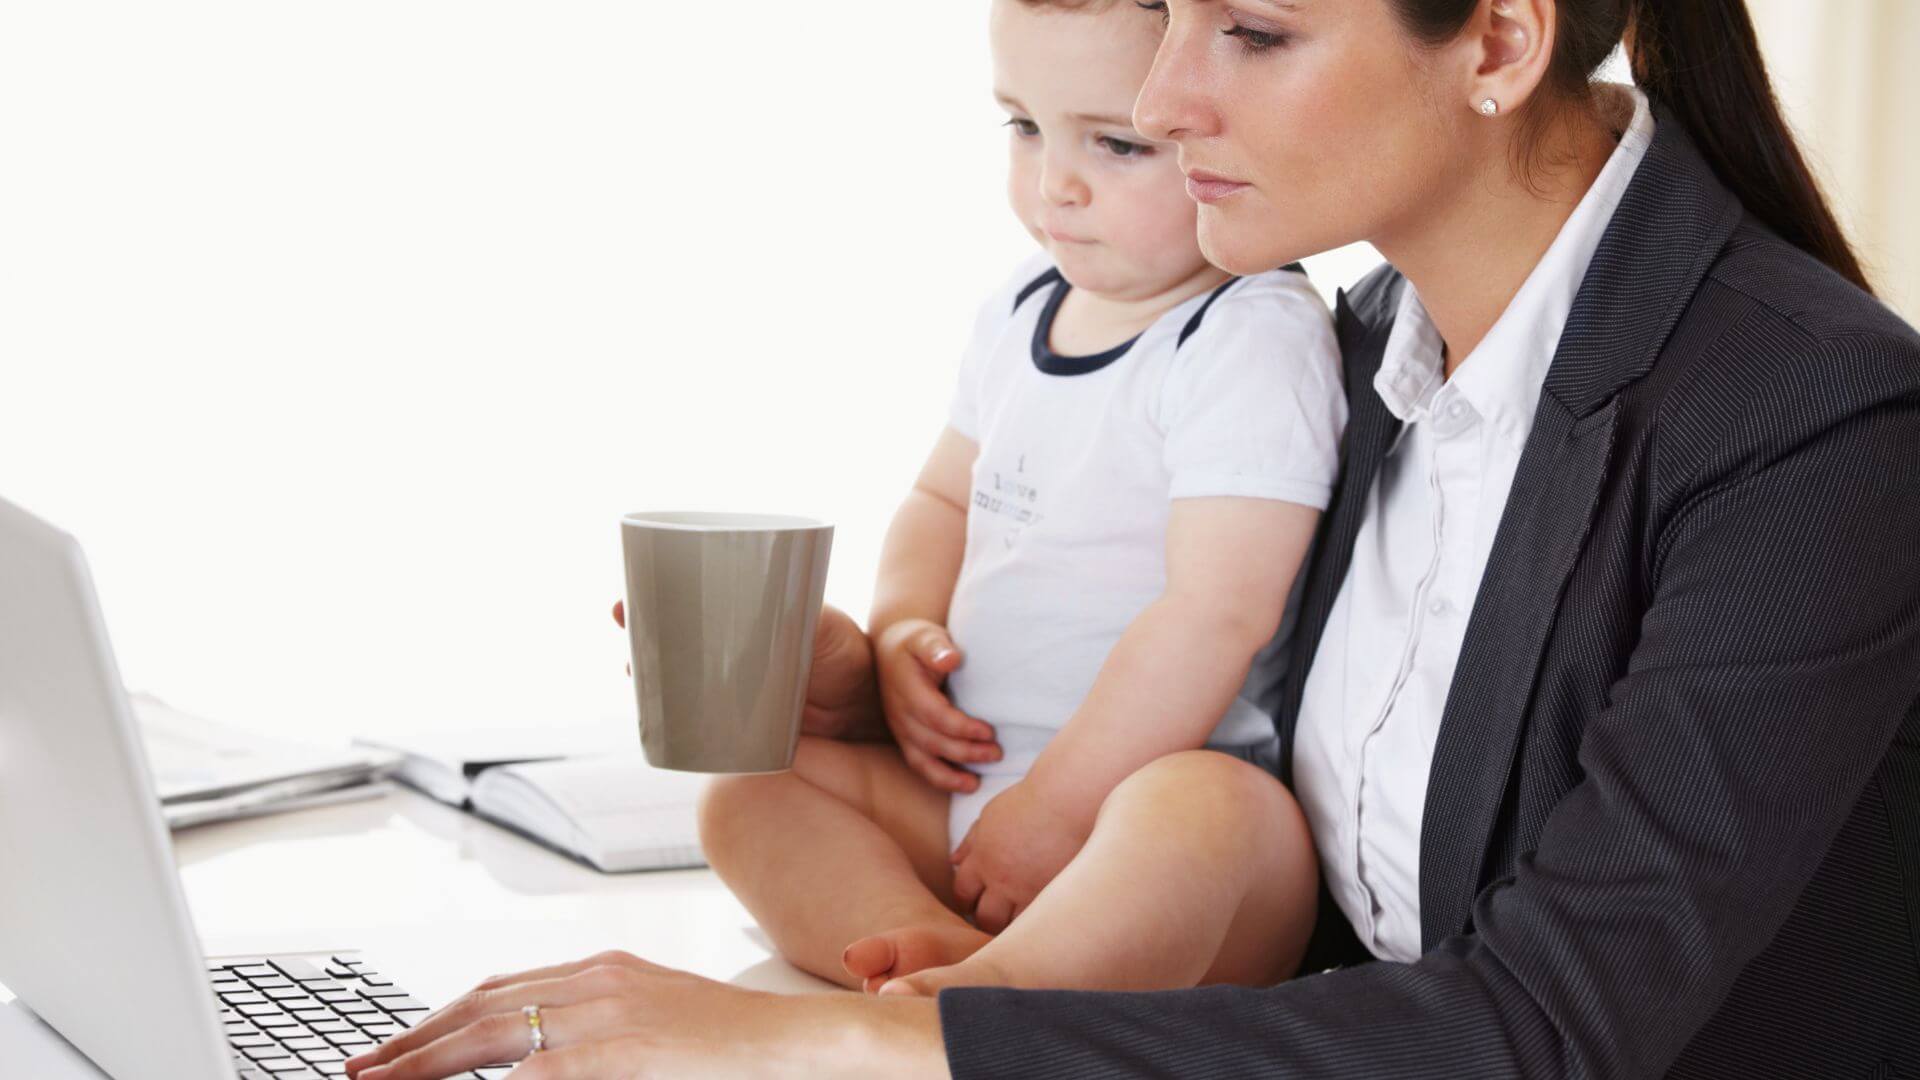 Corporate Jobs vs Home-Based Businesses for Moms